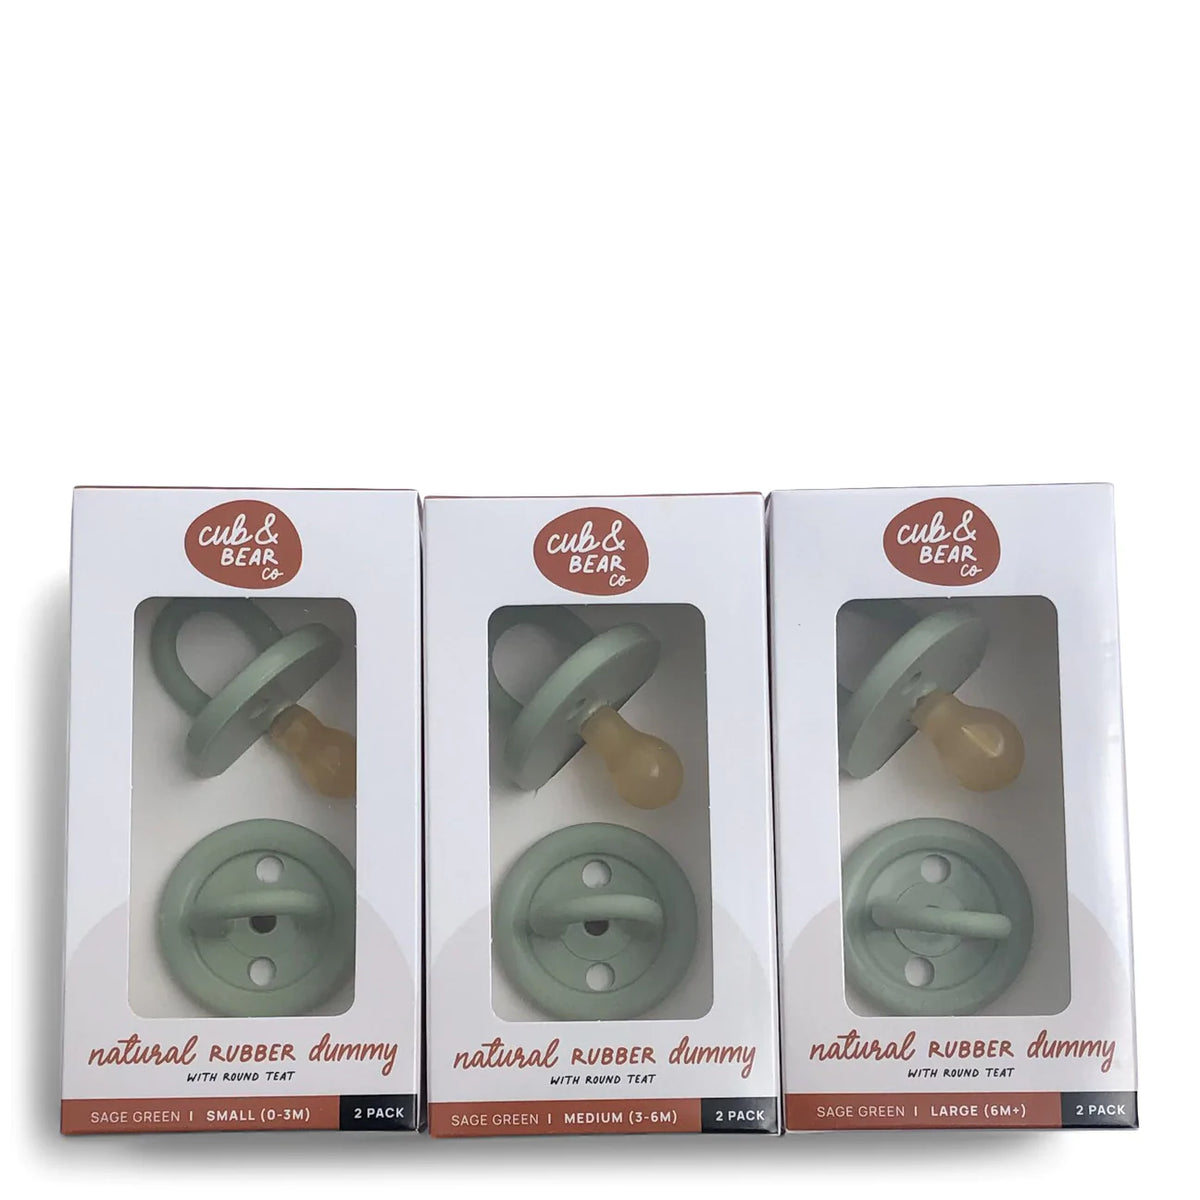 Sage Green Natural Rubber Dummy | Cub &amp; Bear Co